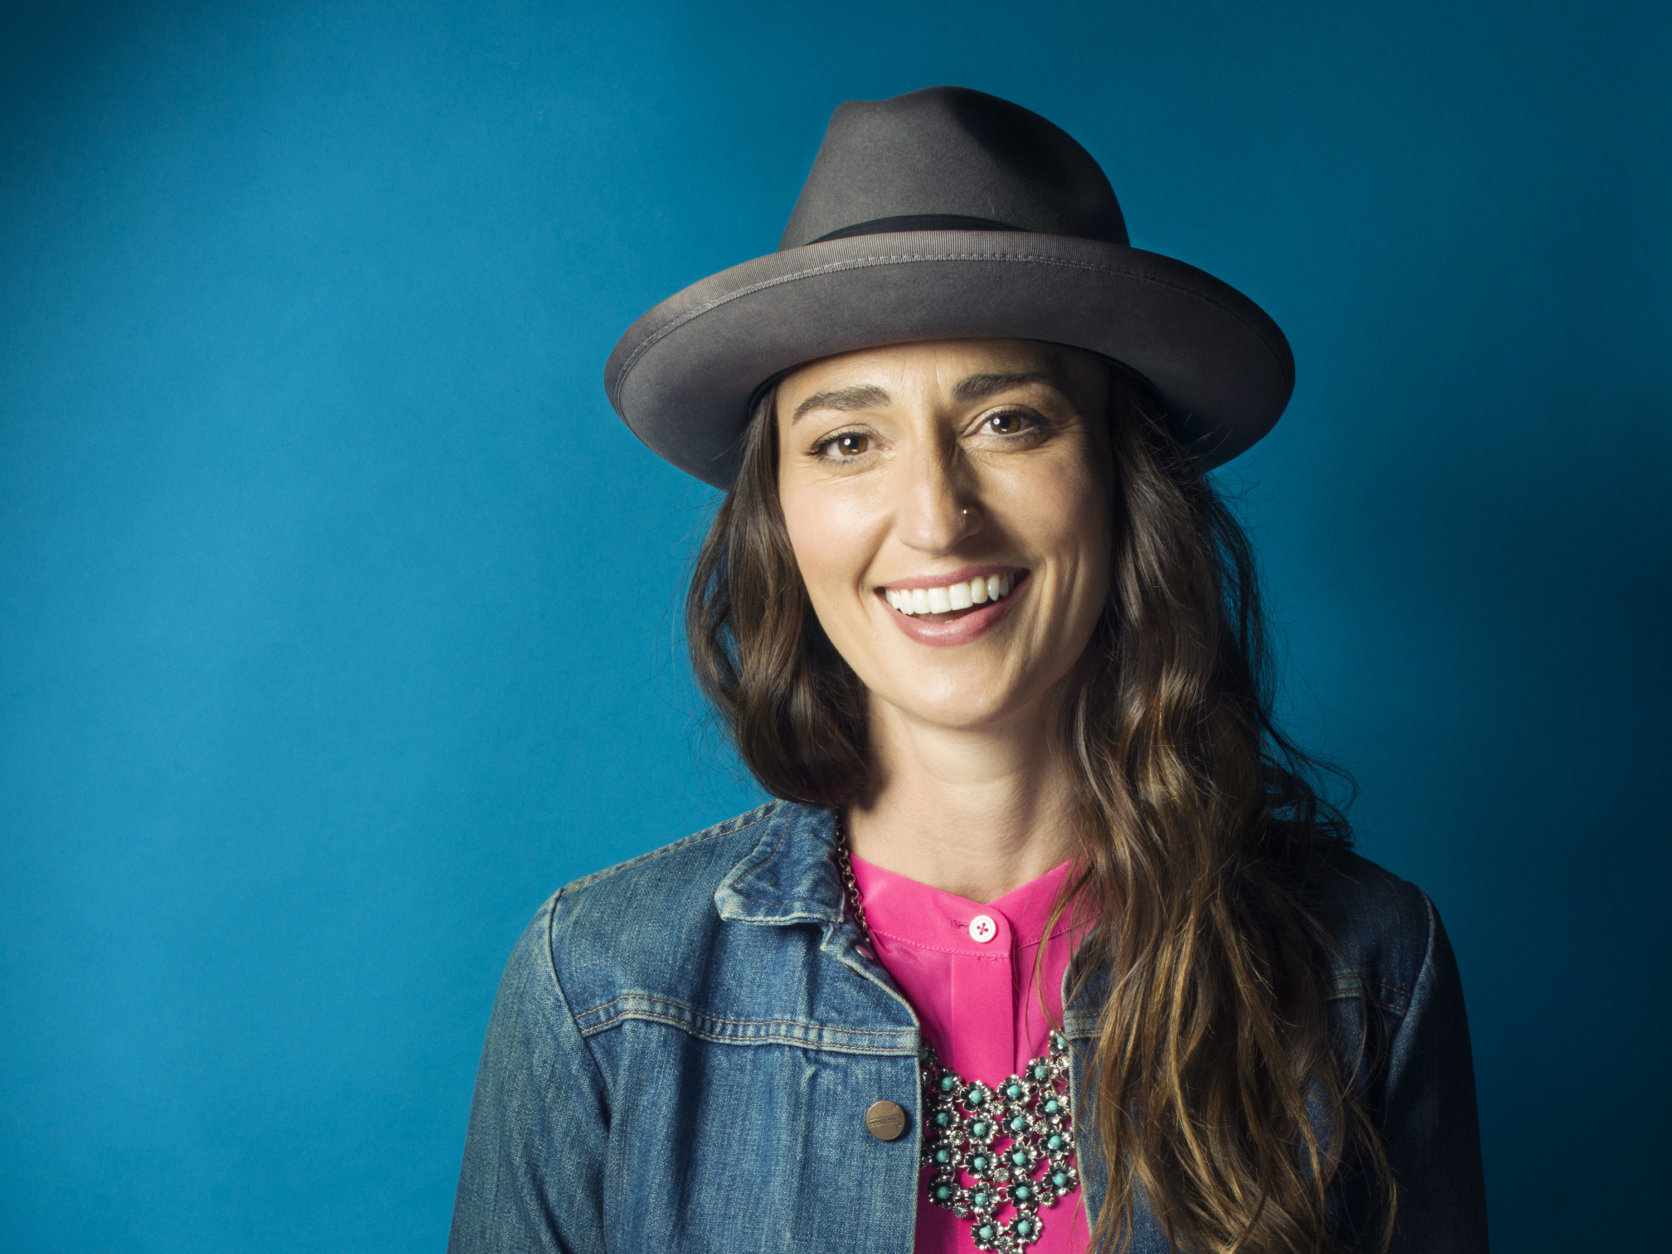 In this Nov. 3, 2015 photo, musician Sara Bareilles poses for a portrait in New York. The singer-songwriter of hits like "Brave" and "Love Song" has changed gears entirely to write eclectic music for the Broadway-bound stage musical "Waitress." (Photo by Victoria Will/Invision/AP)